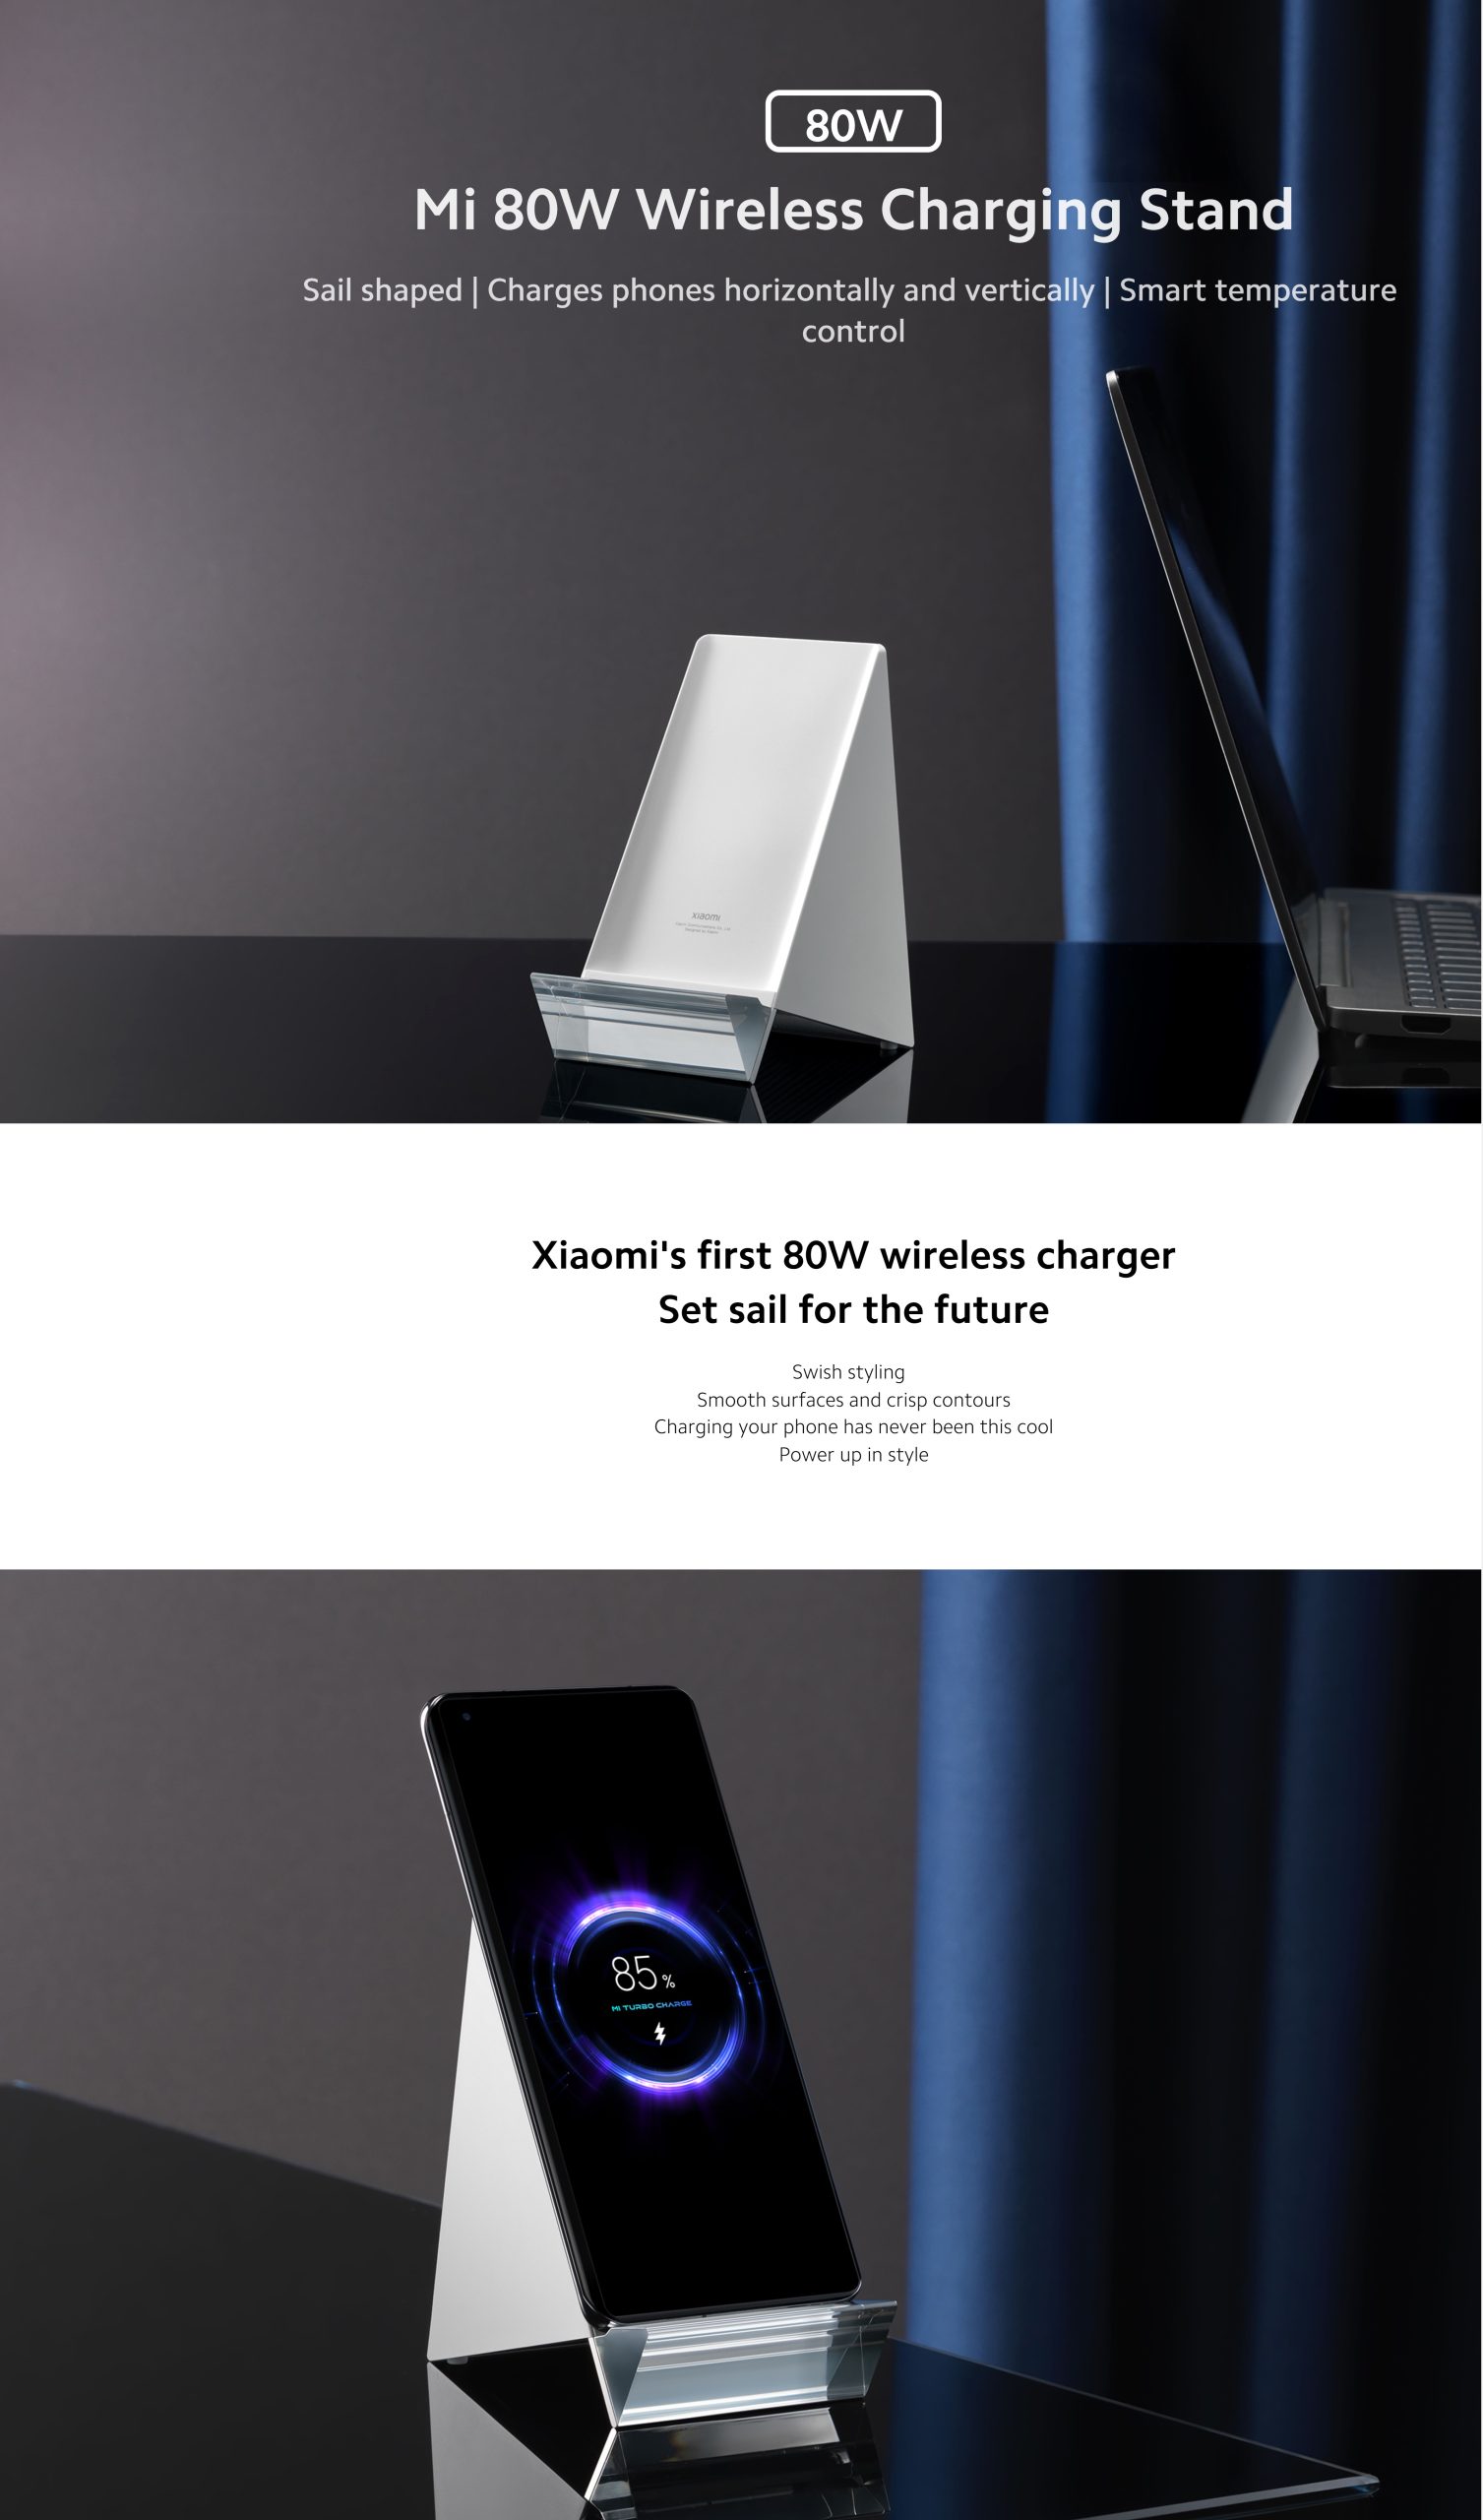 Mi 80W Wireless Charging Stand + 120W Fast Charger